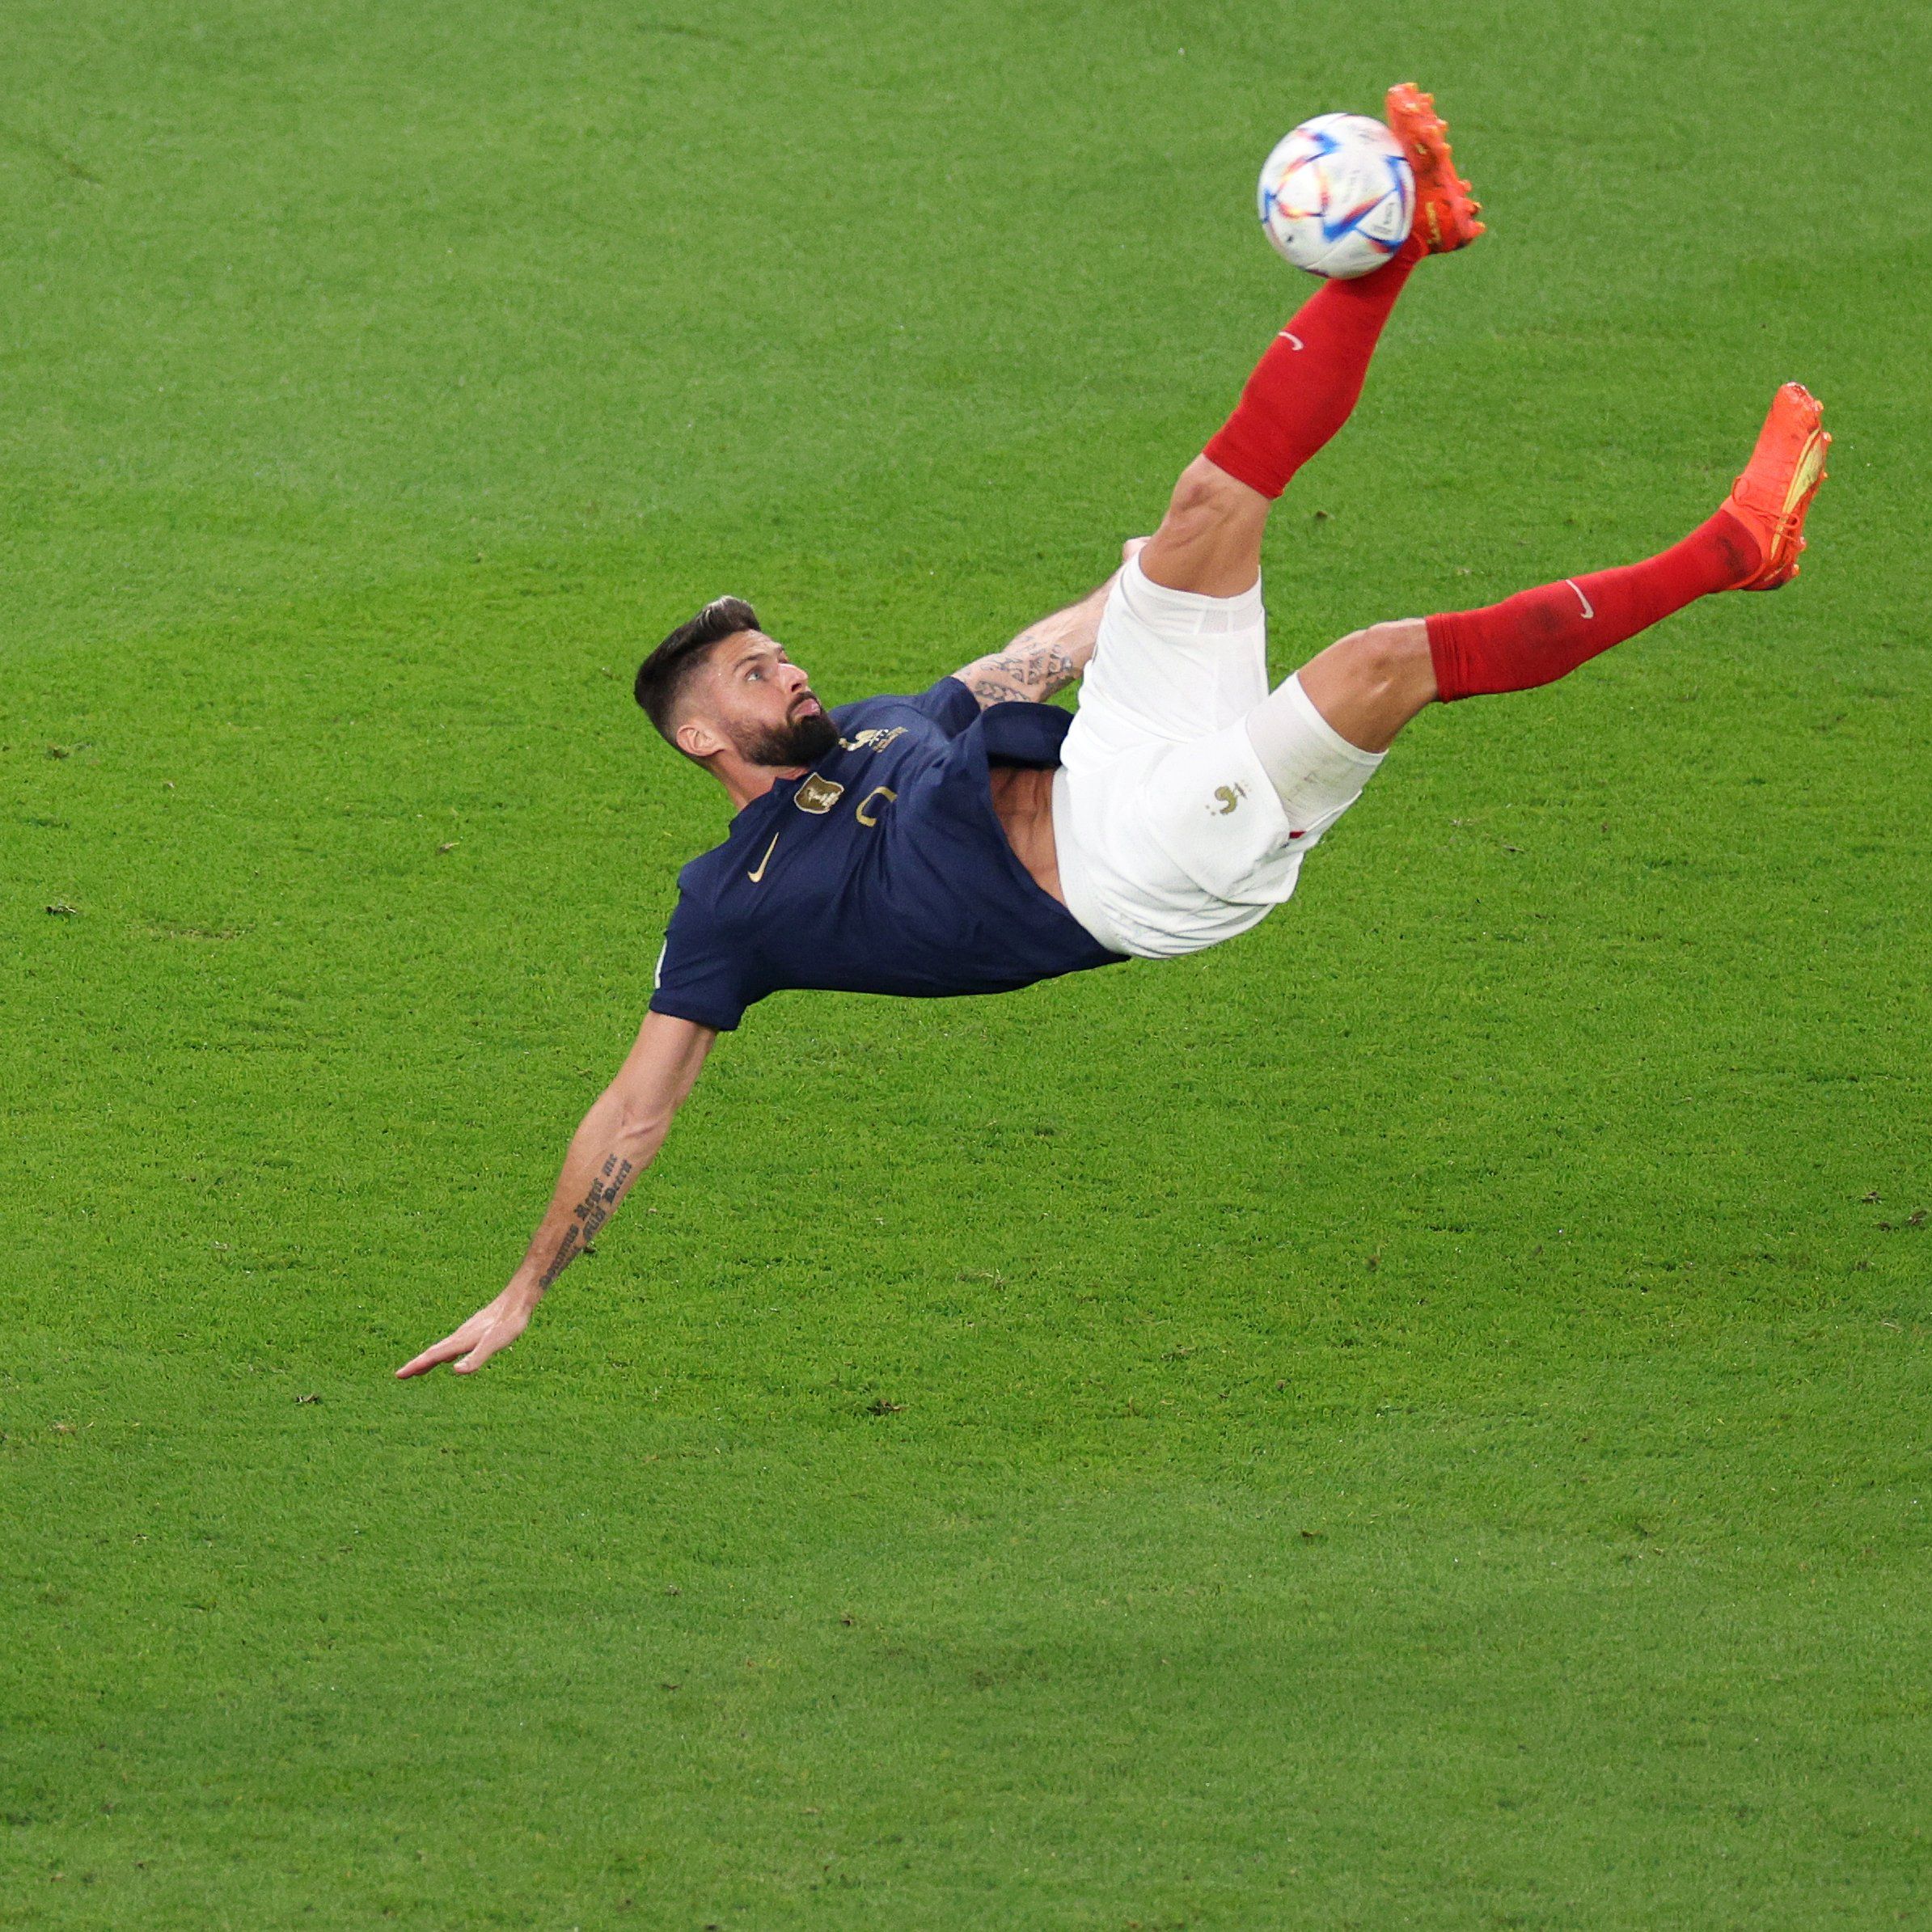 Almost 53! France’s Olivier Giroud’s over-head kick goal ruled out vs Poland in FIFA World Cup 2022